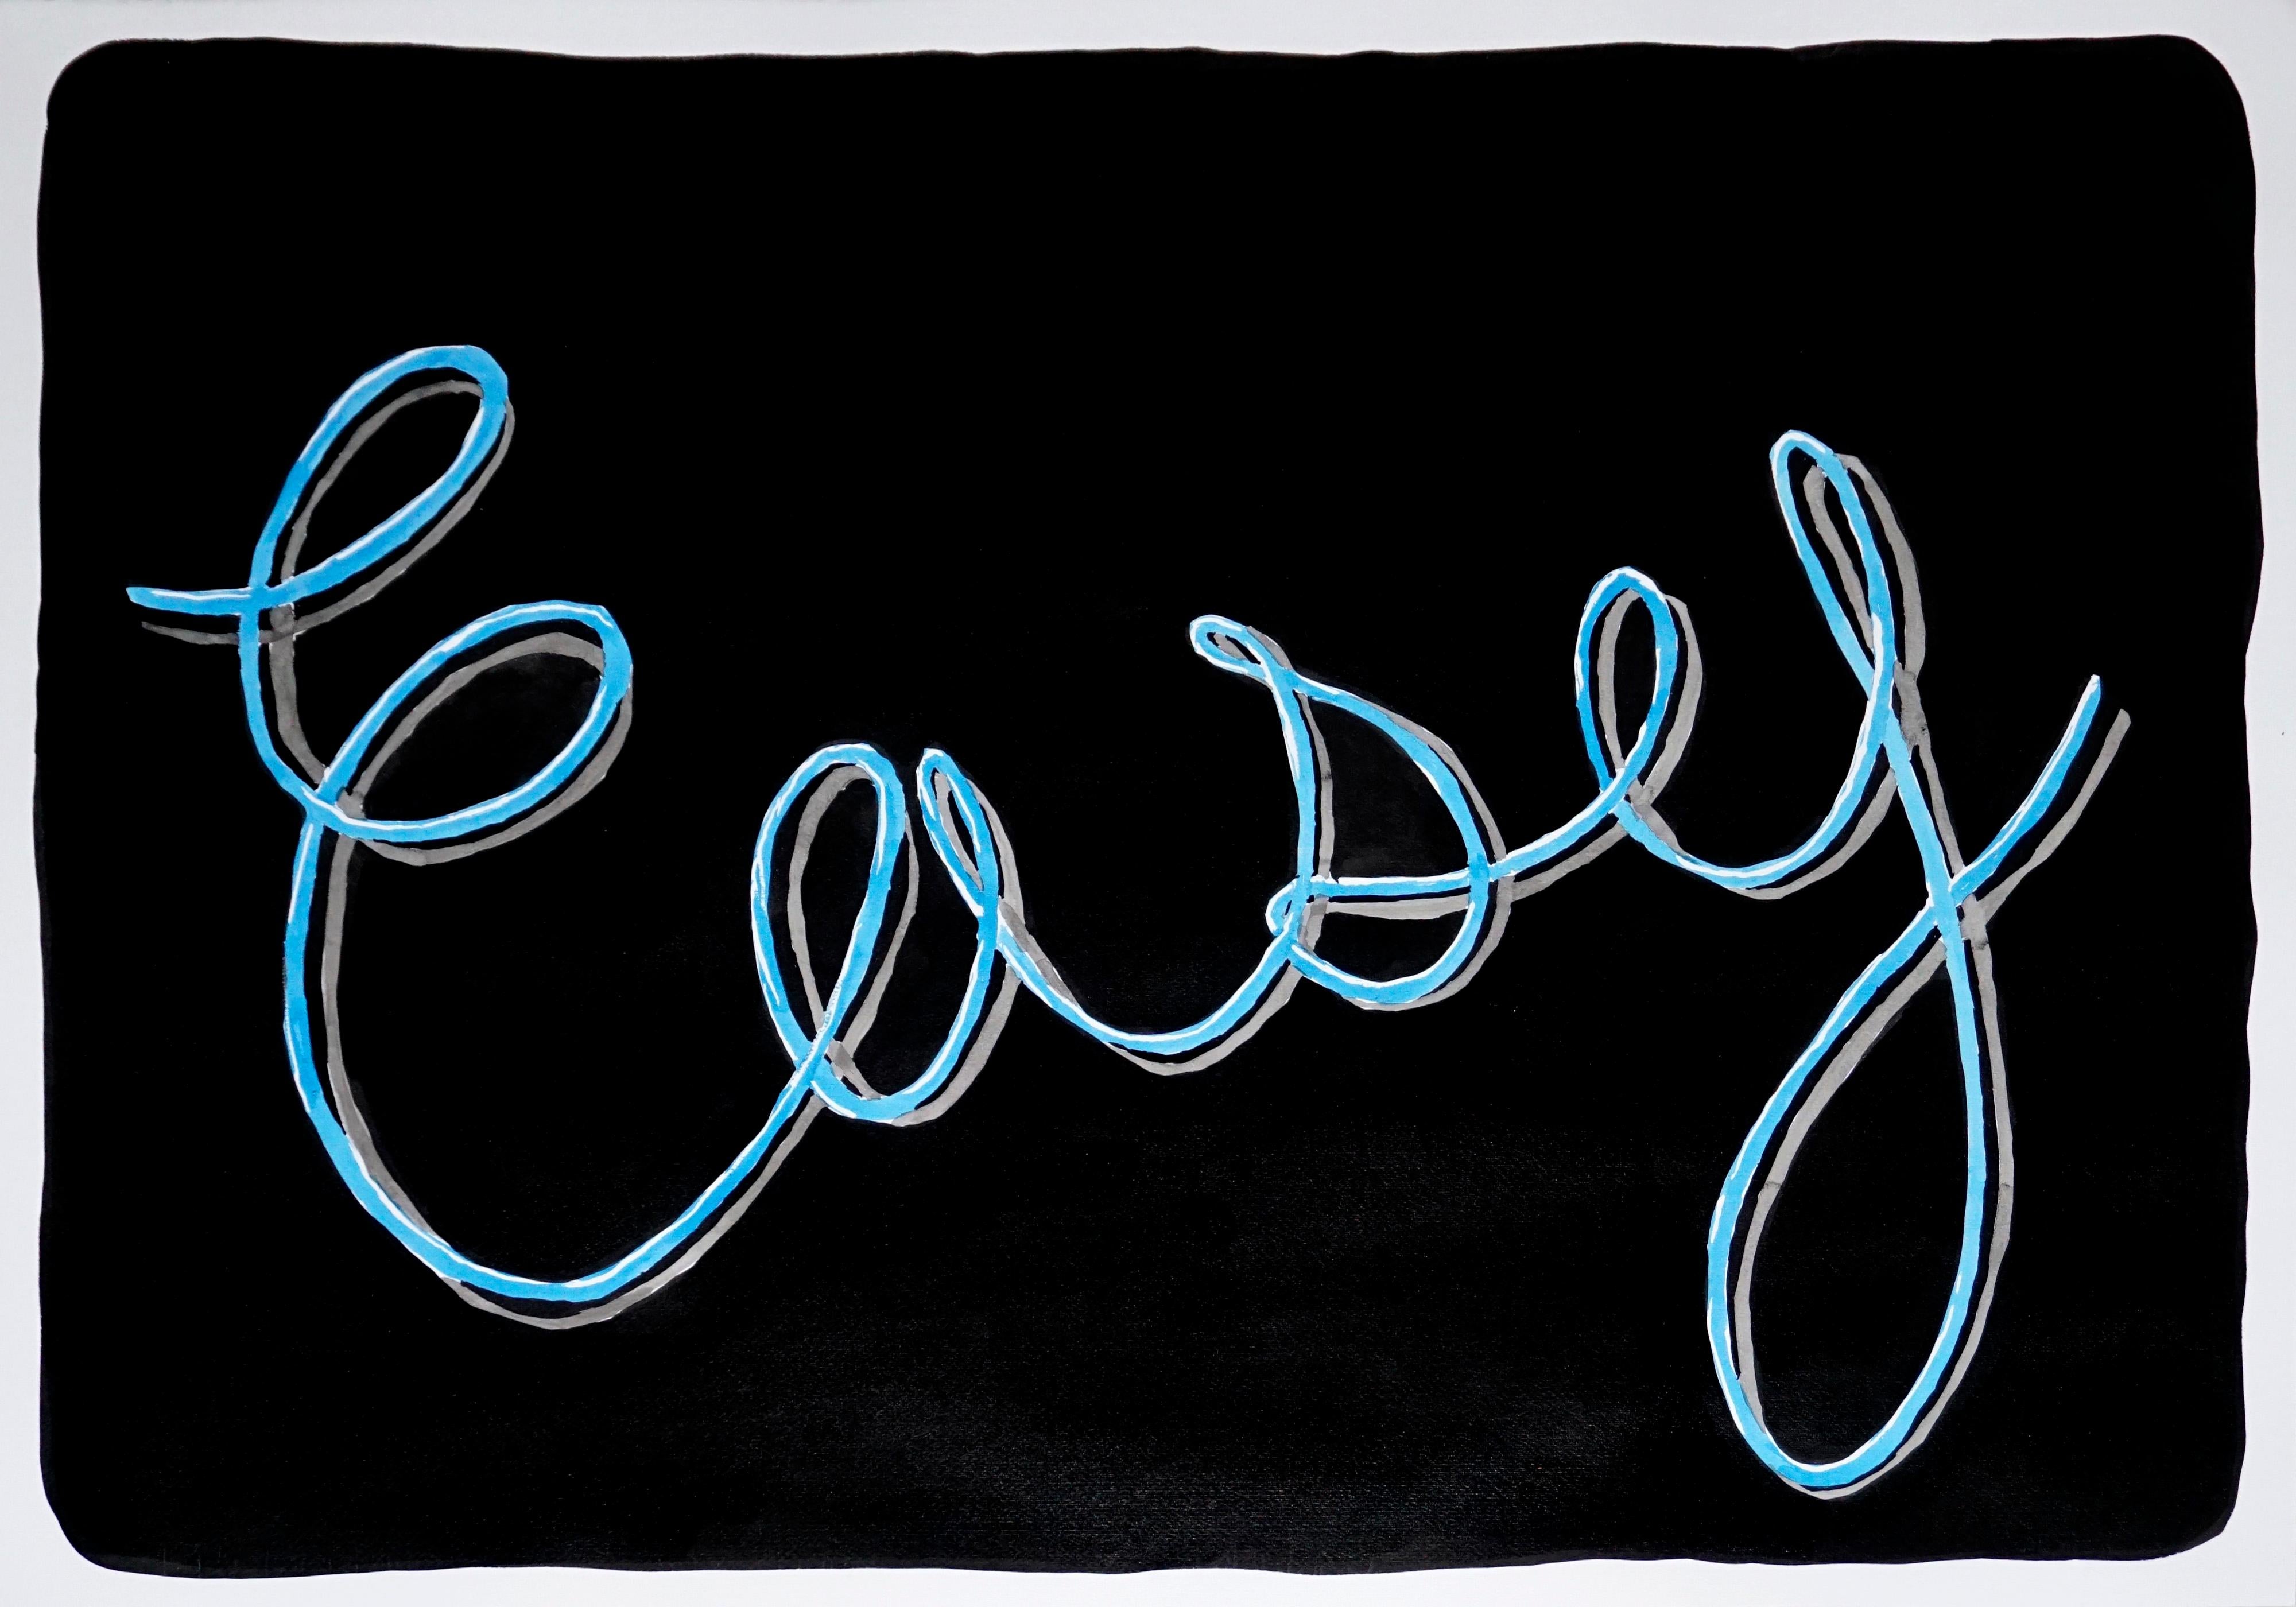 Easy, Black Background Calligraphy Painting on Paper, Word Art, Sky Blue, Grey